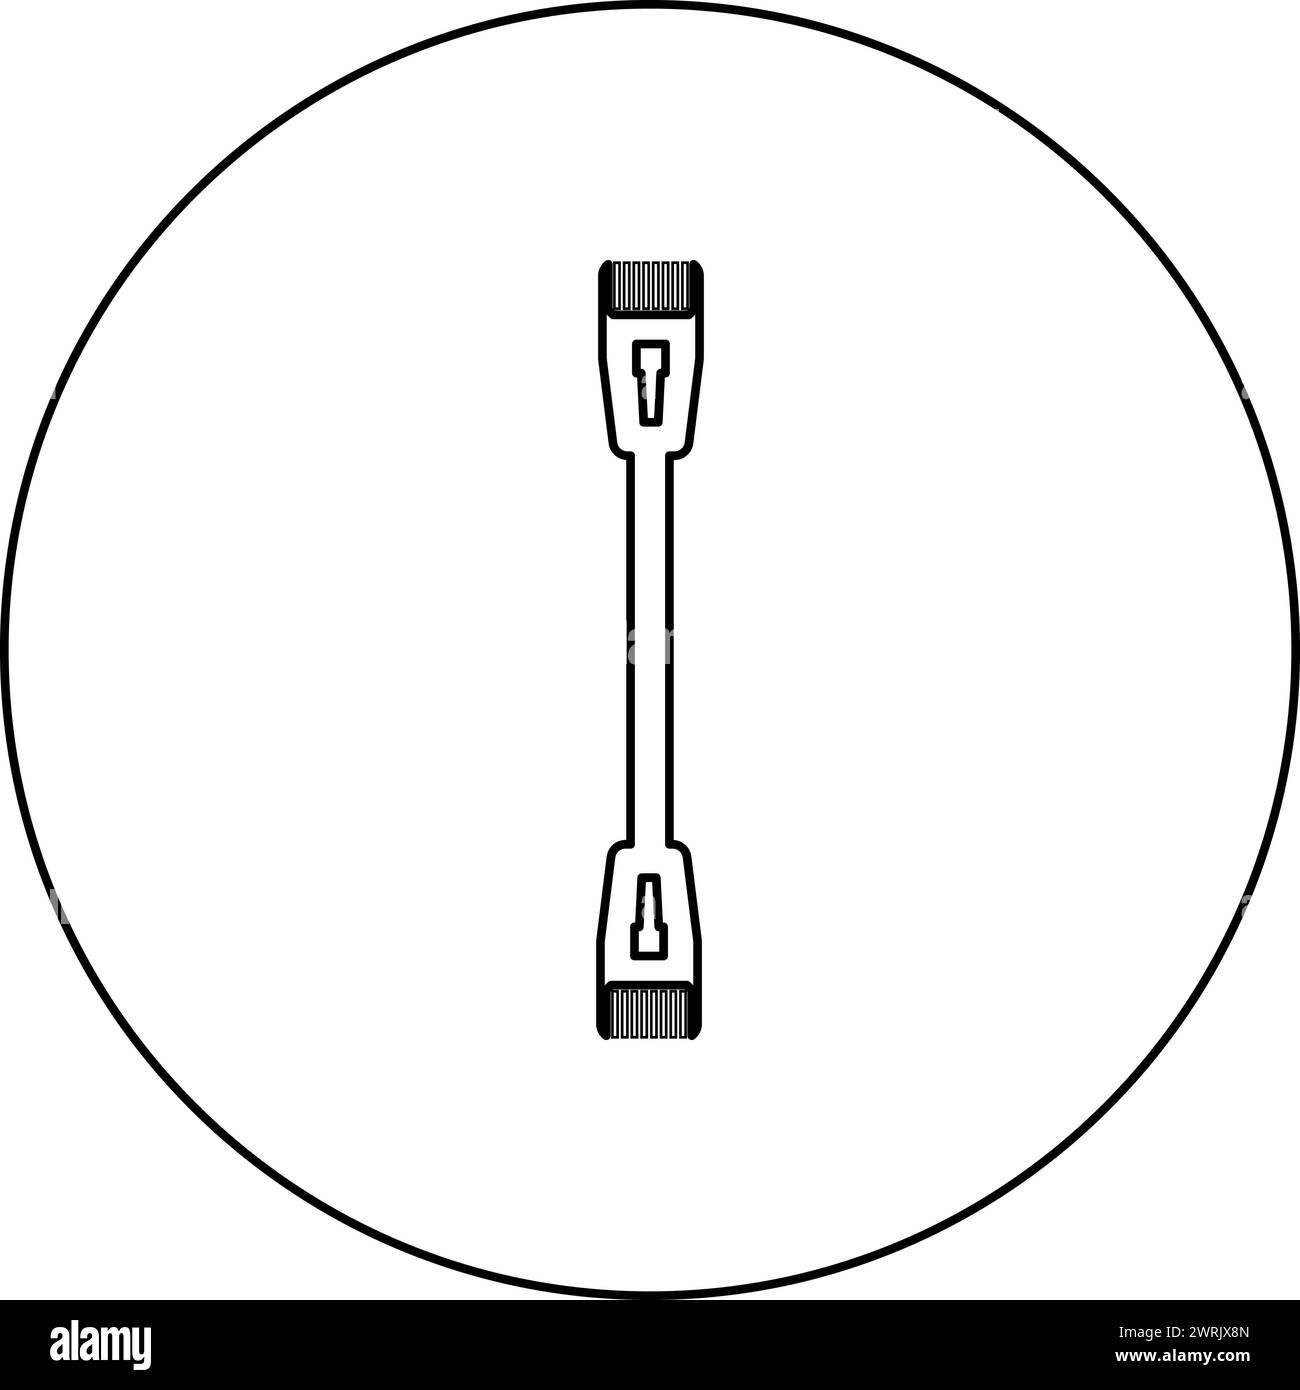 Patch cable path cord ethernet technology rj45 net concept icon in circle round black color vector illustration image outline contour line thin style Stock Vector